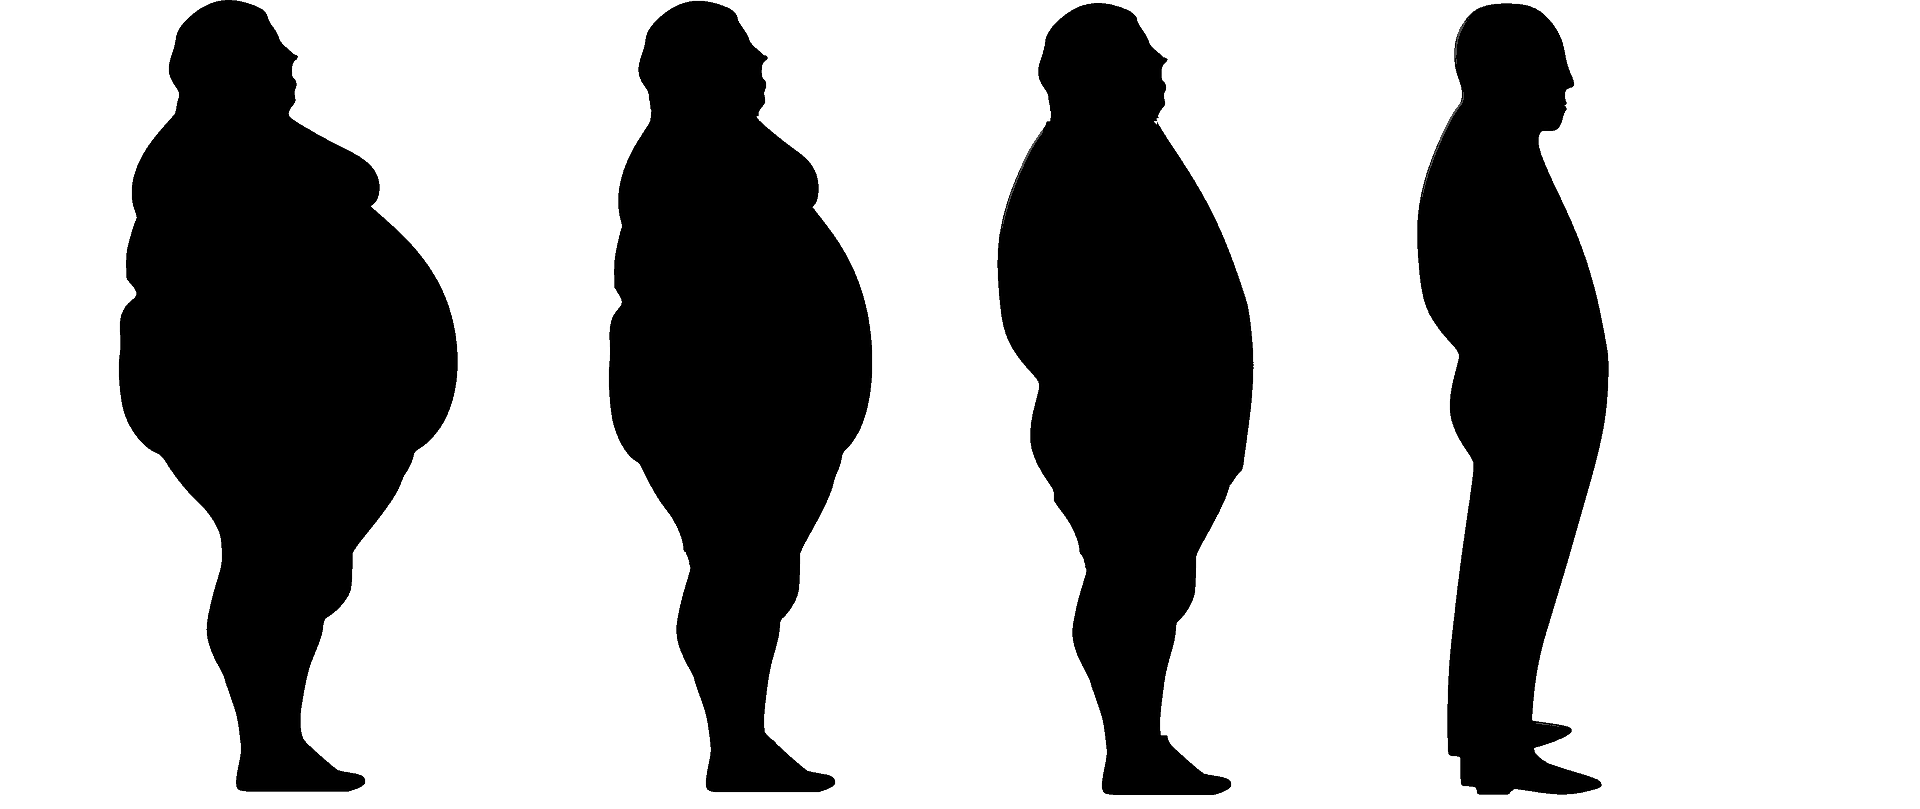 silhouette of a man's body from obese to ideal weight